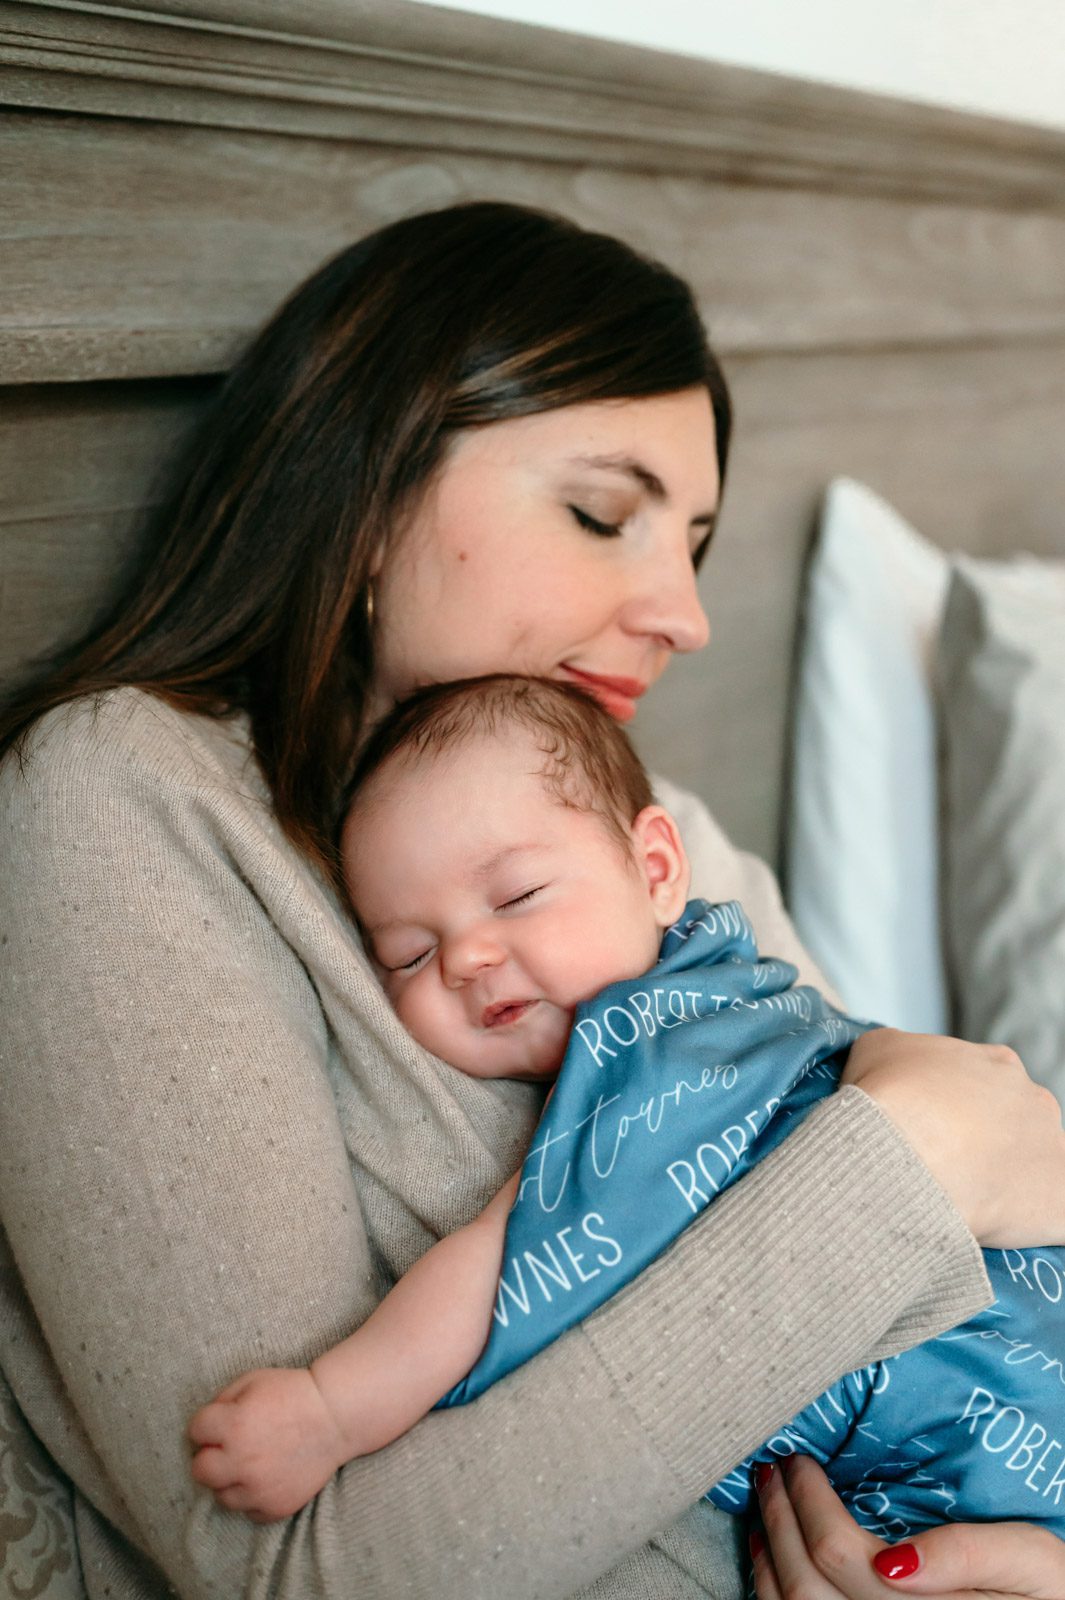 A new mom sitting on her bed snuggling her newborn baby boy against her chest during a home newborn photoshoot